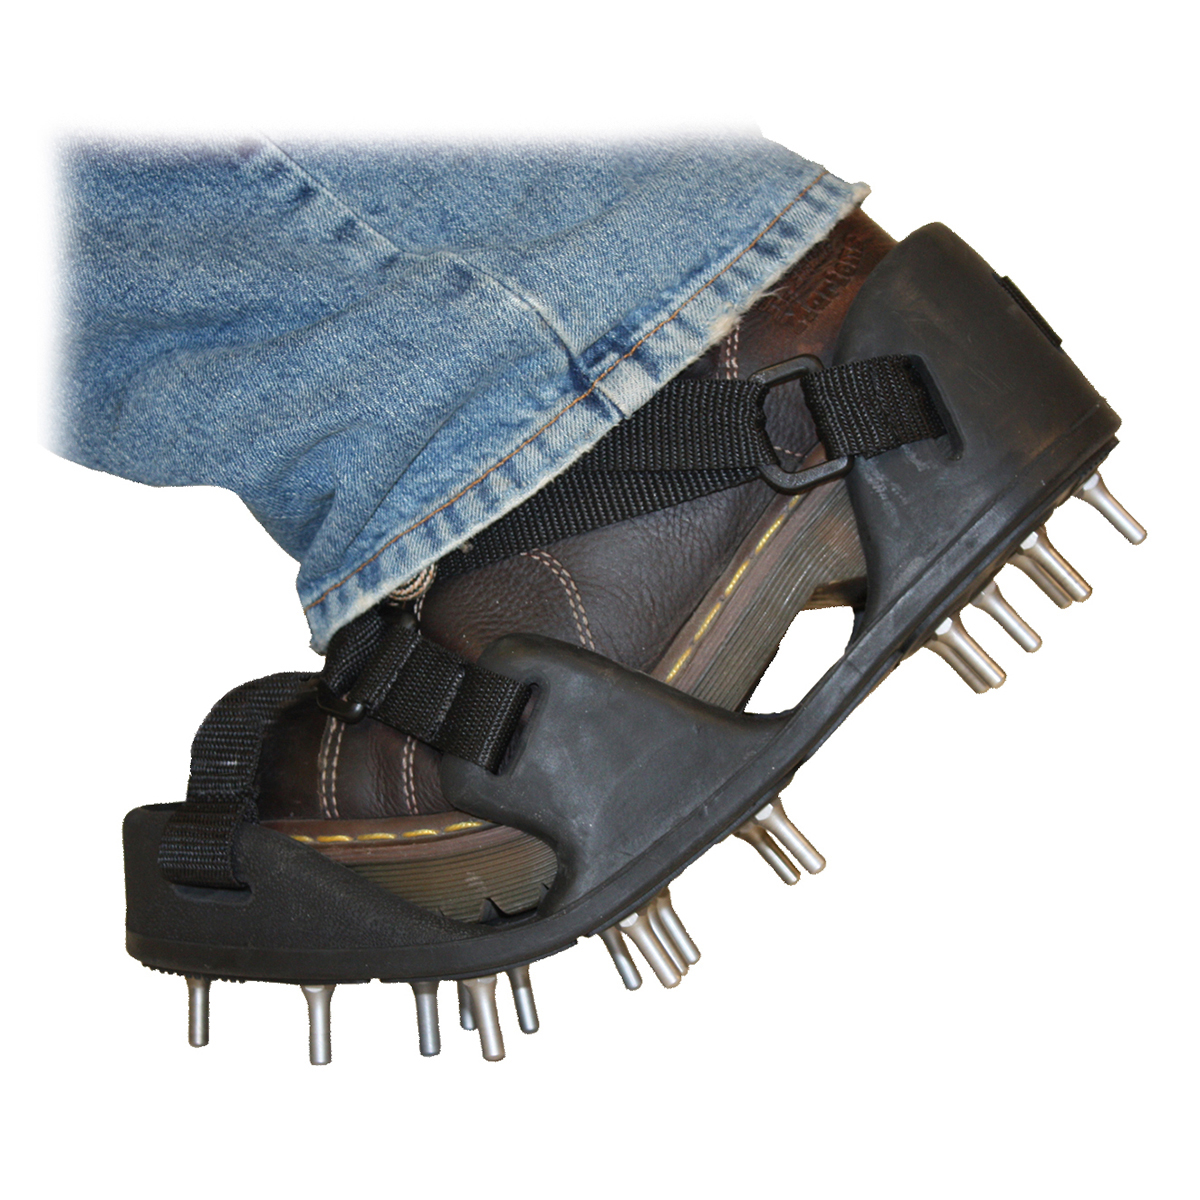 Flexible Bed Spiked Shoes with 7/8 Rounded Tip Spikes - L (Shoe Size 10 -  11-1/2)